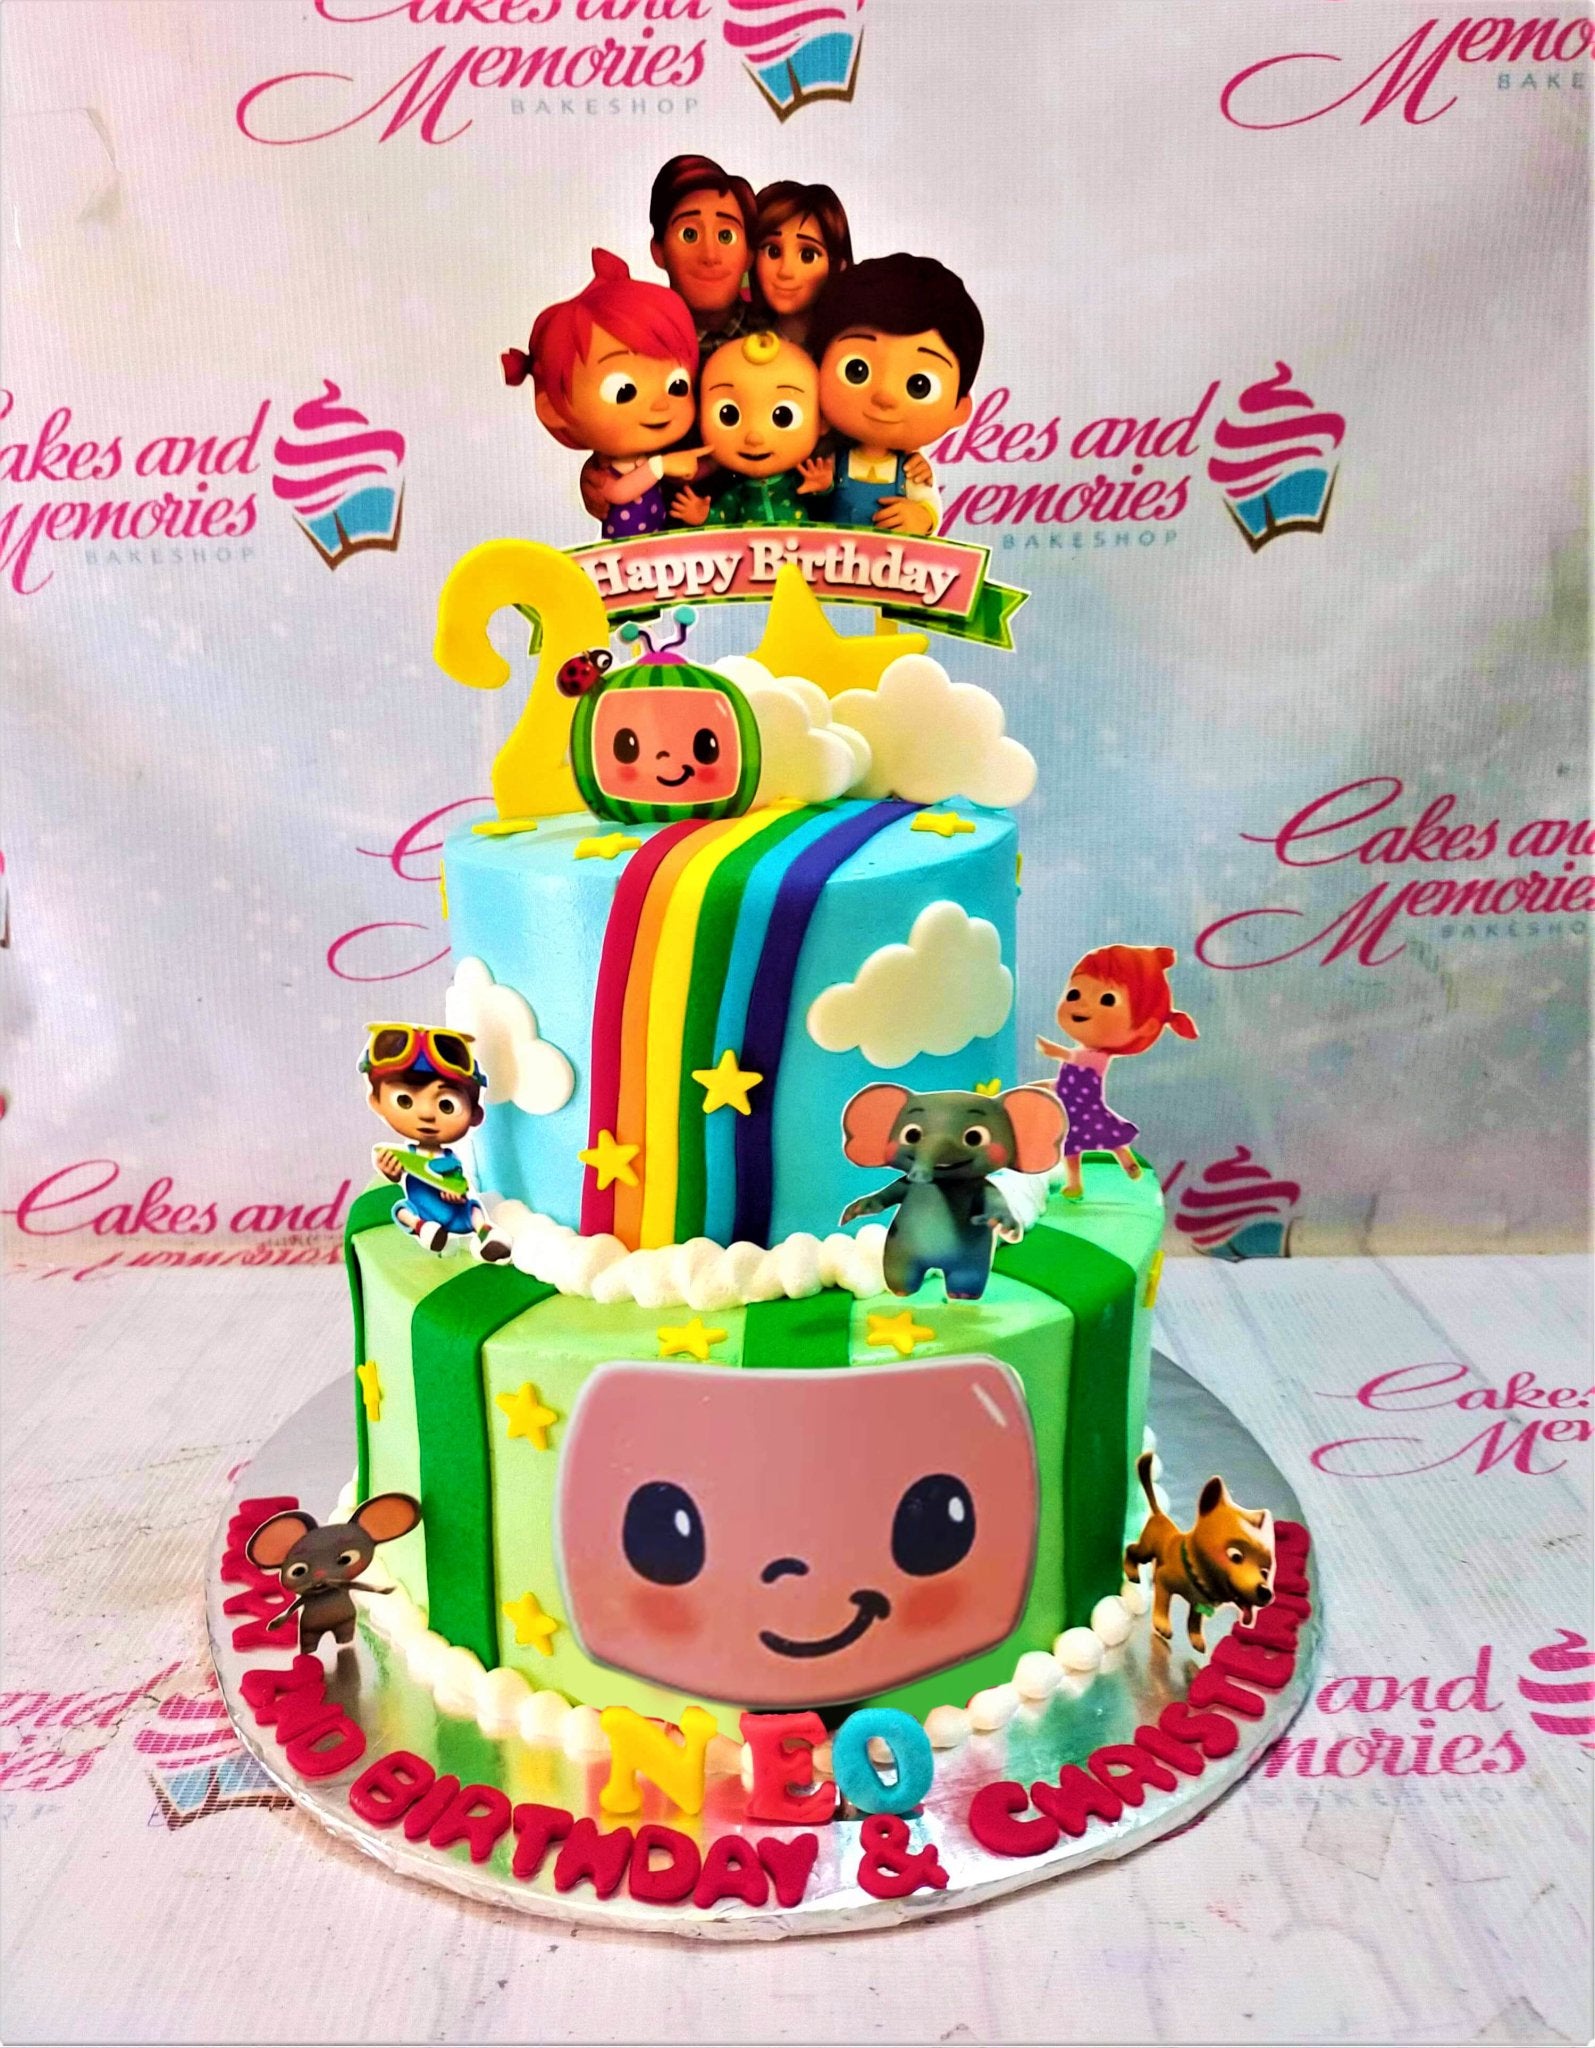 A Cake To Celebrate Your Little One : Cocomelon Theme First Birthday Cake